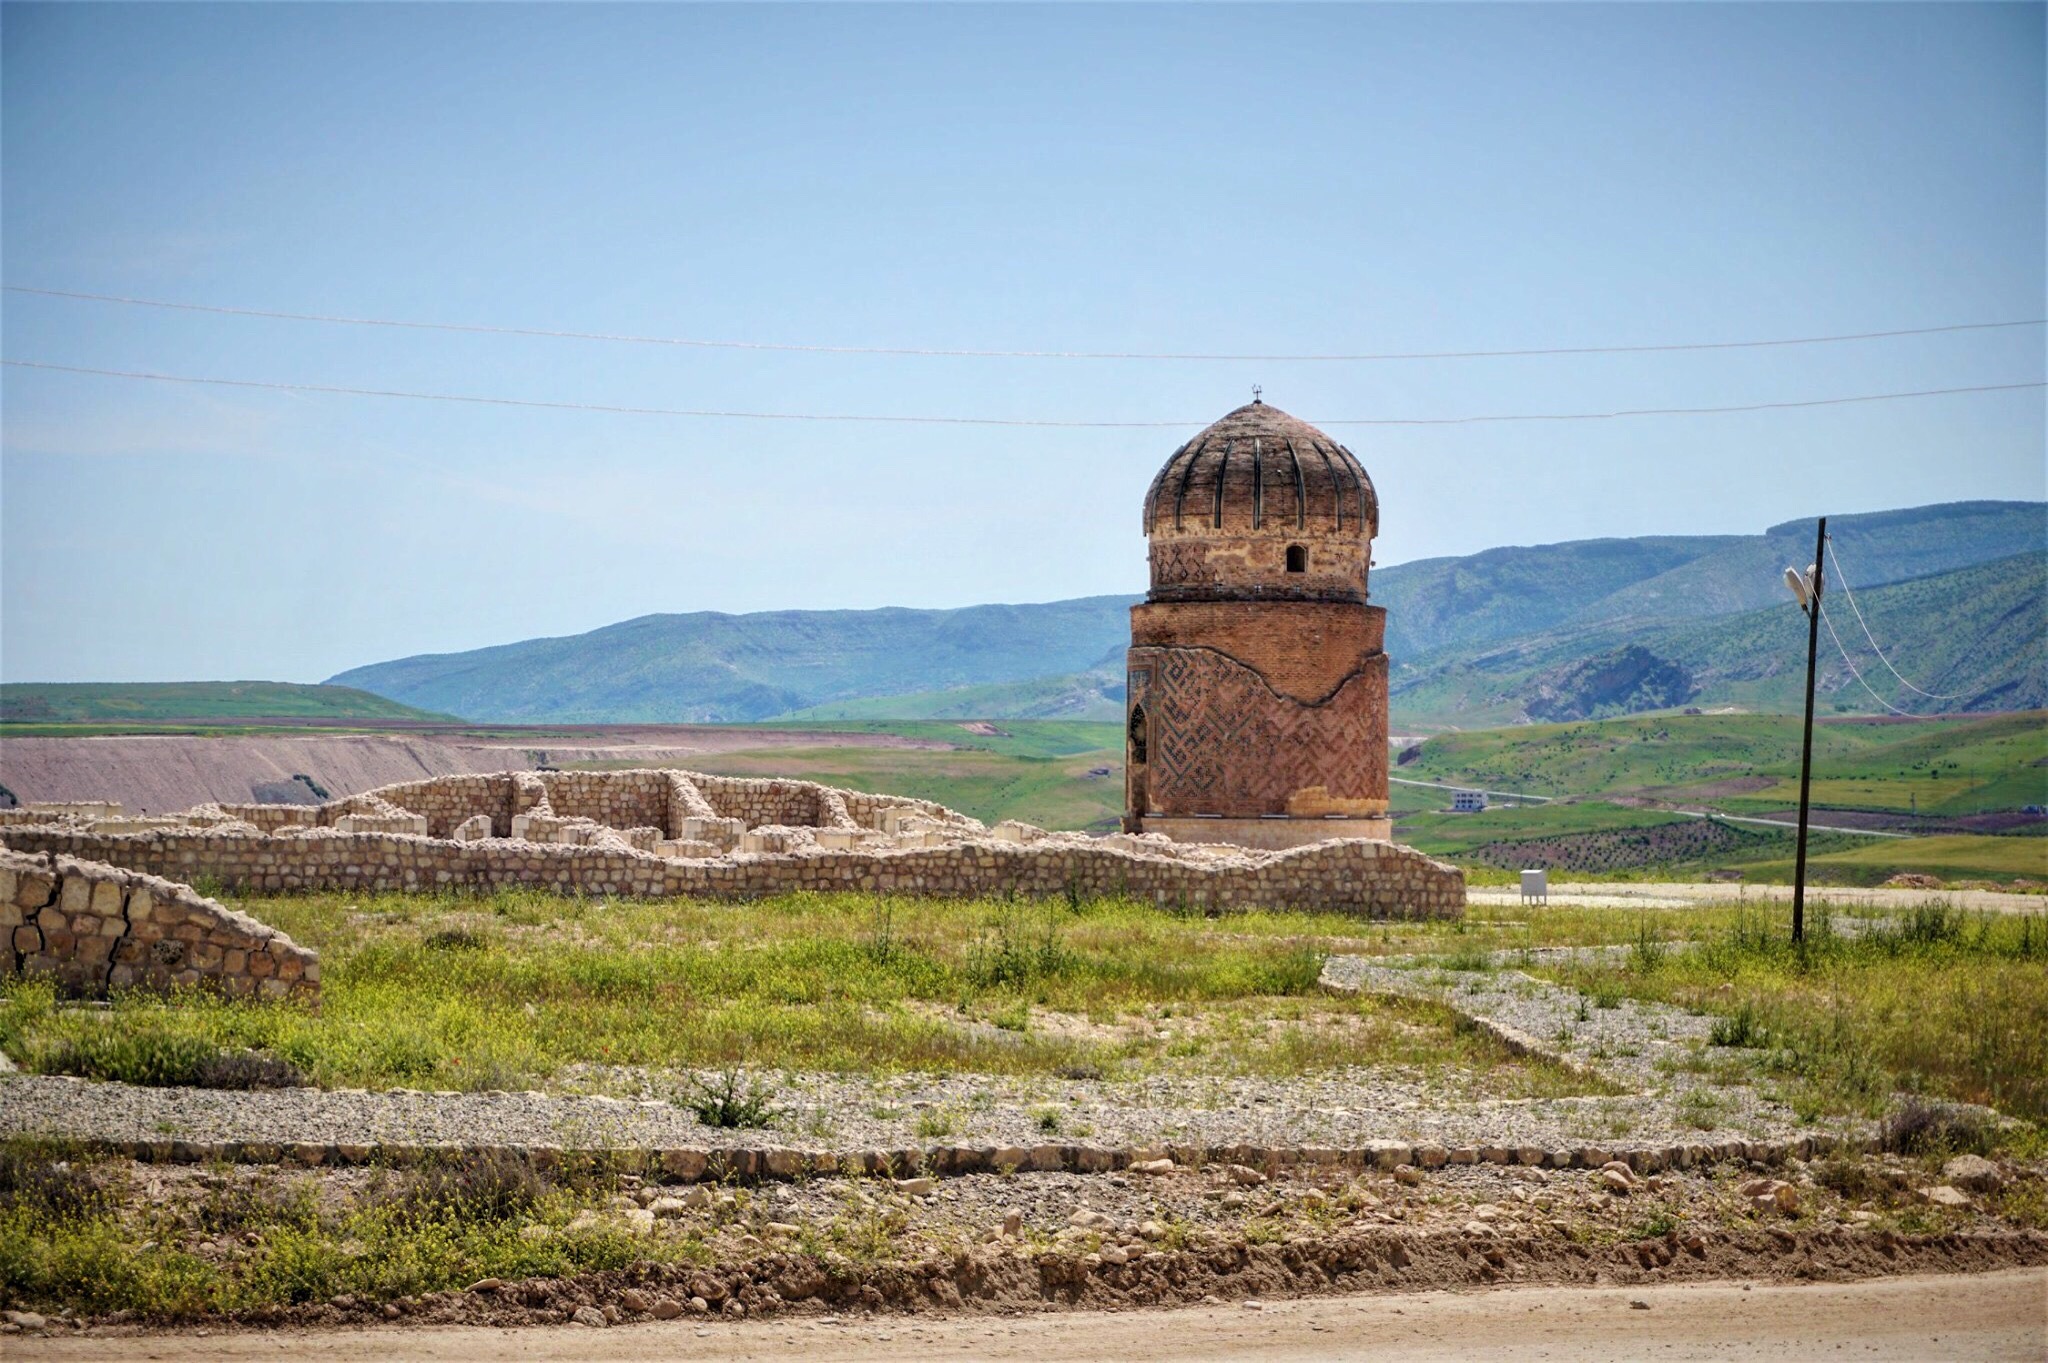 The 550-year-old Zeynel Bey Shrine was displaced May, 2017. It now sits in the archeopark by the 540-year-old Artuqid hamam that is surrounded with replica structures.